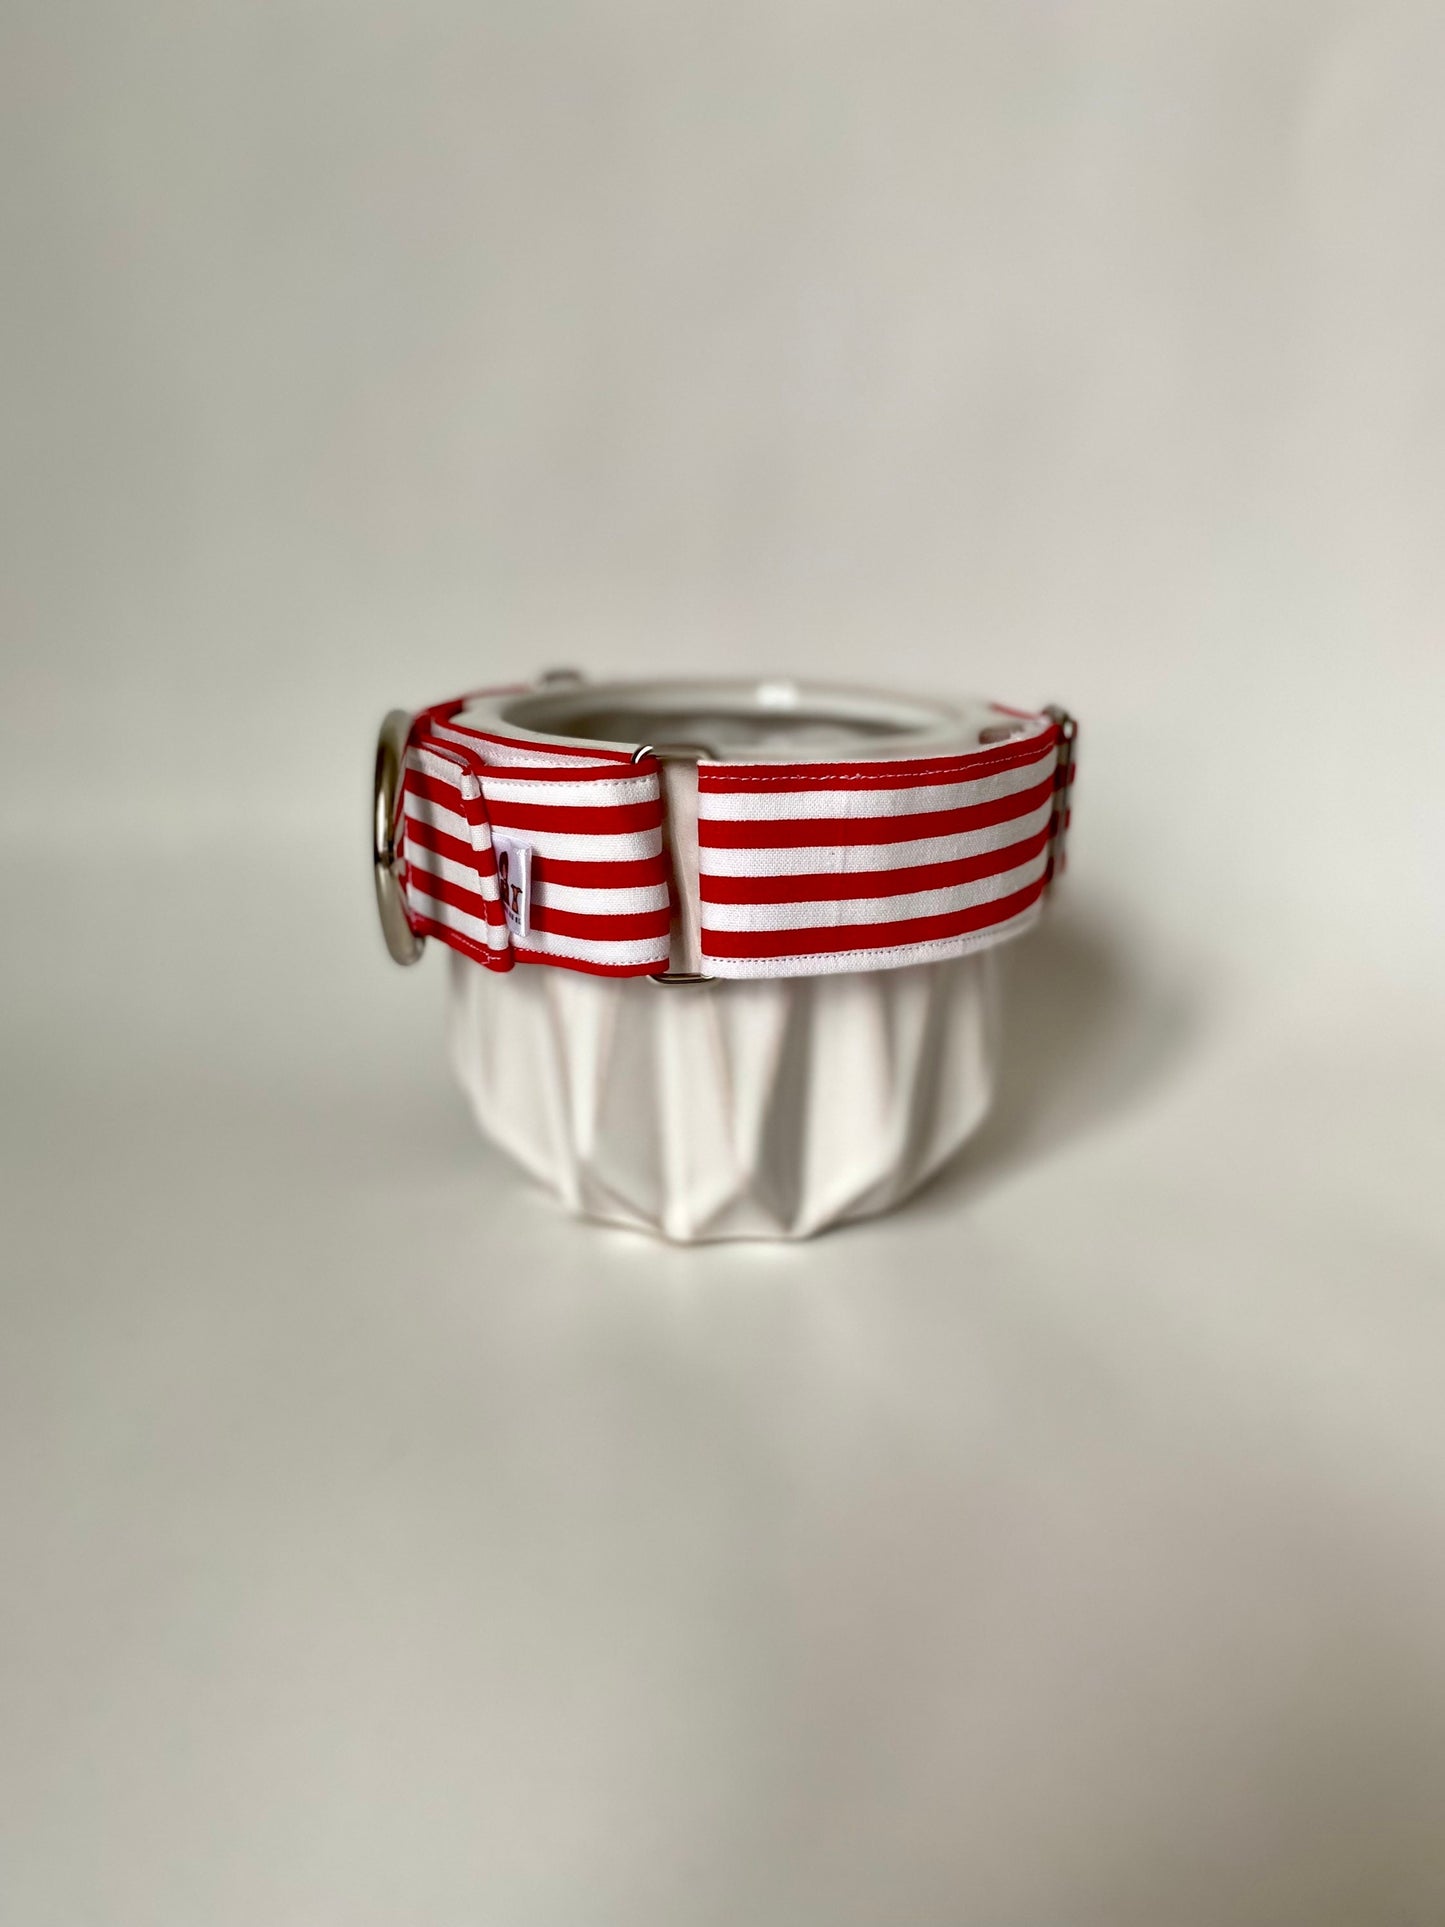 Martingale Collar | Red and White Stripes